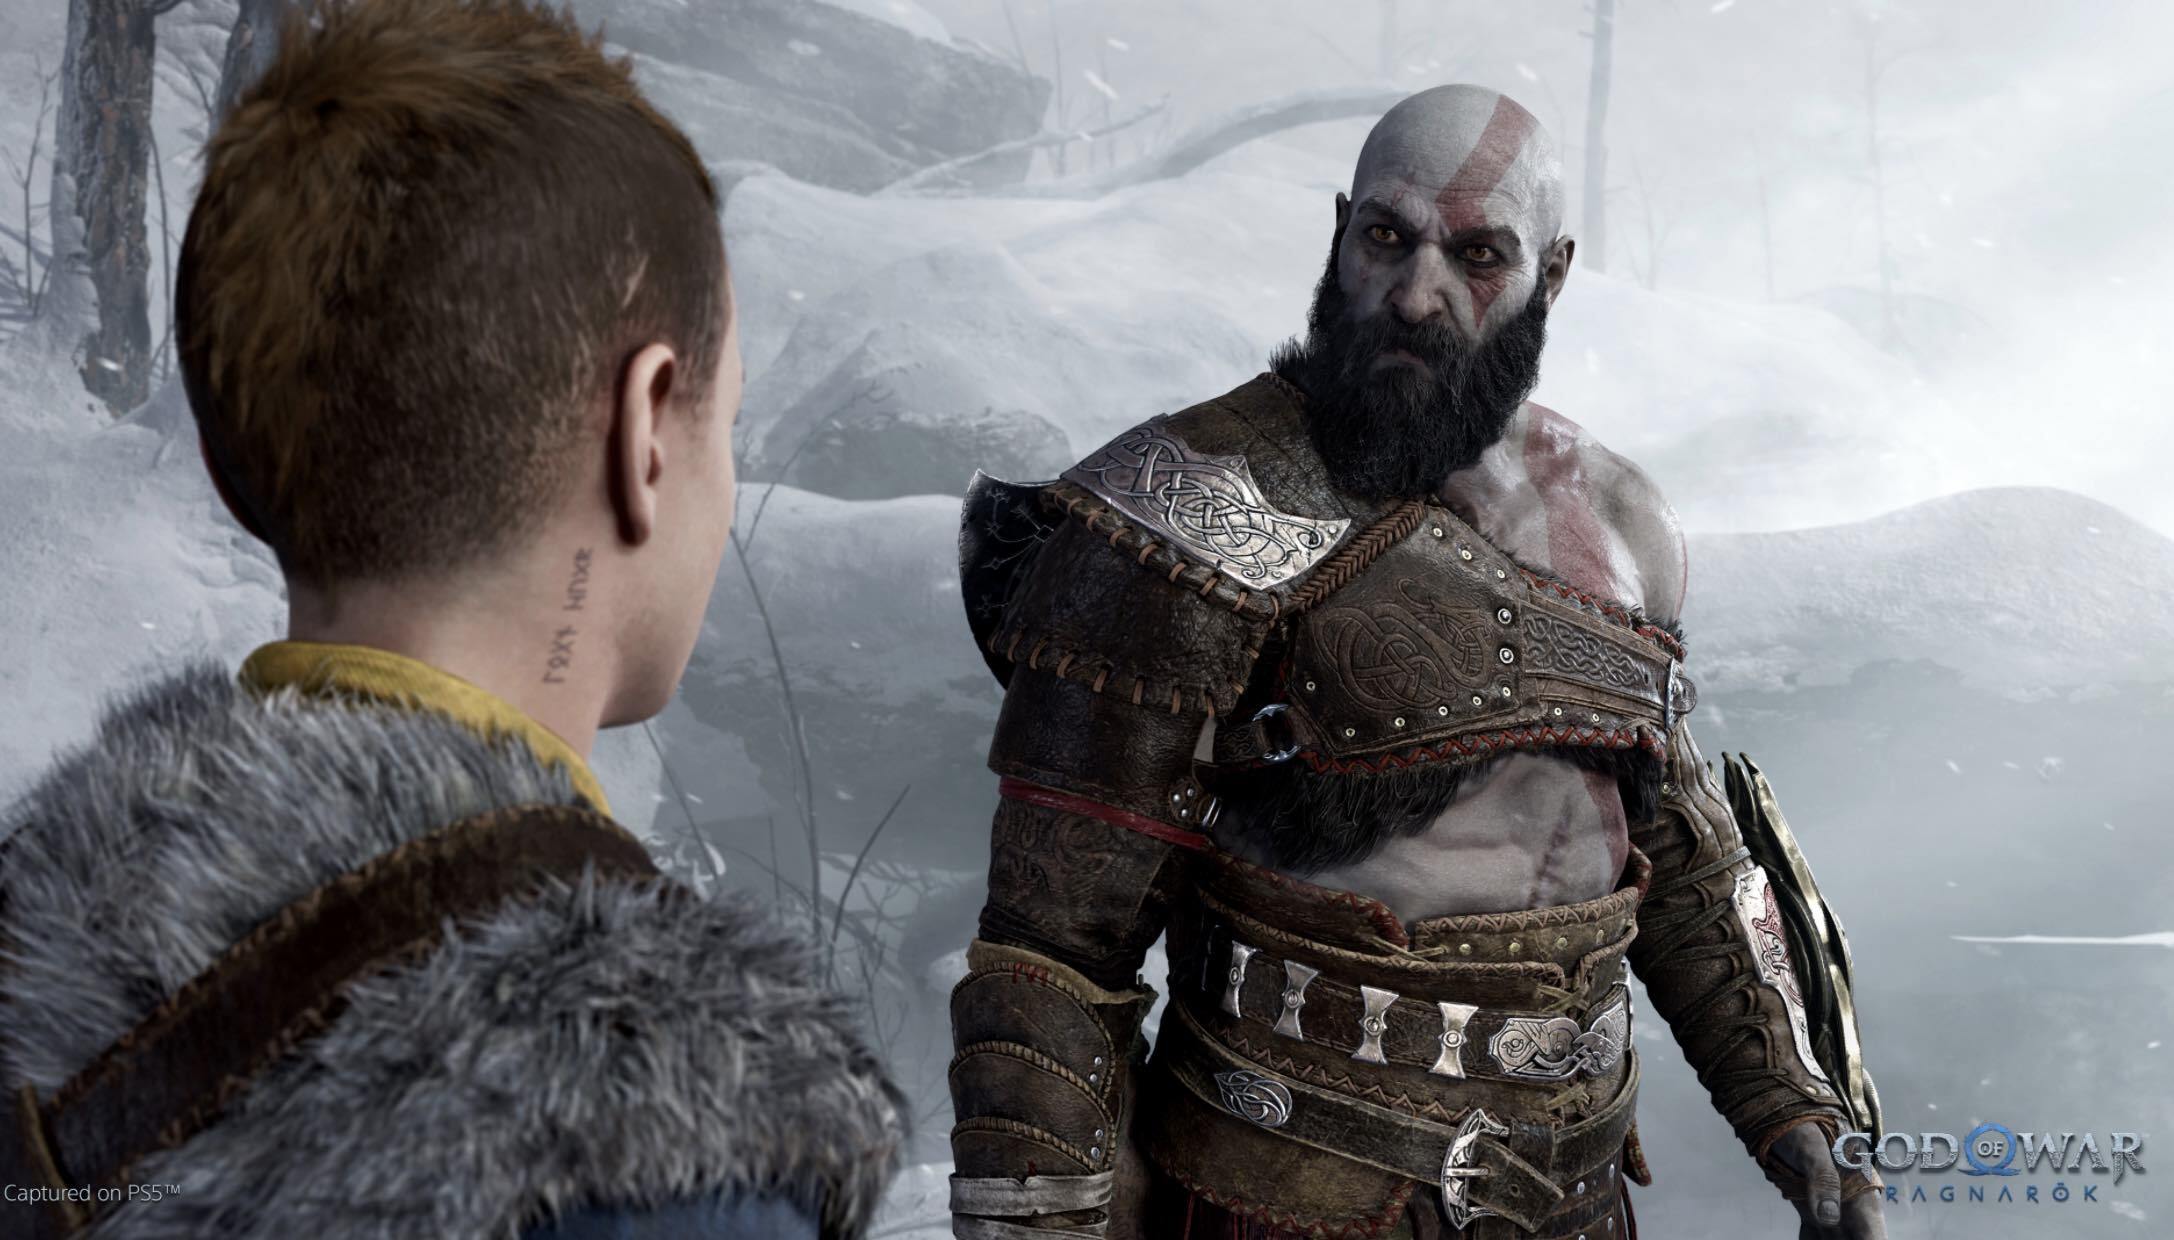 God of War: Ragnarok: Release Date, Latest Trailers, and News